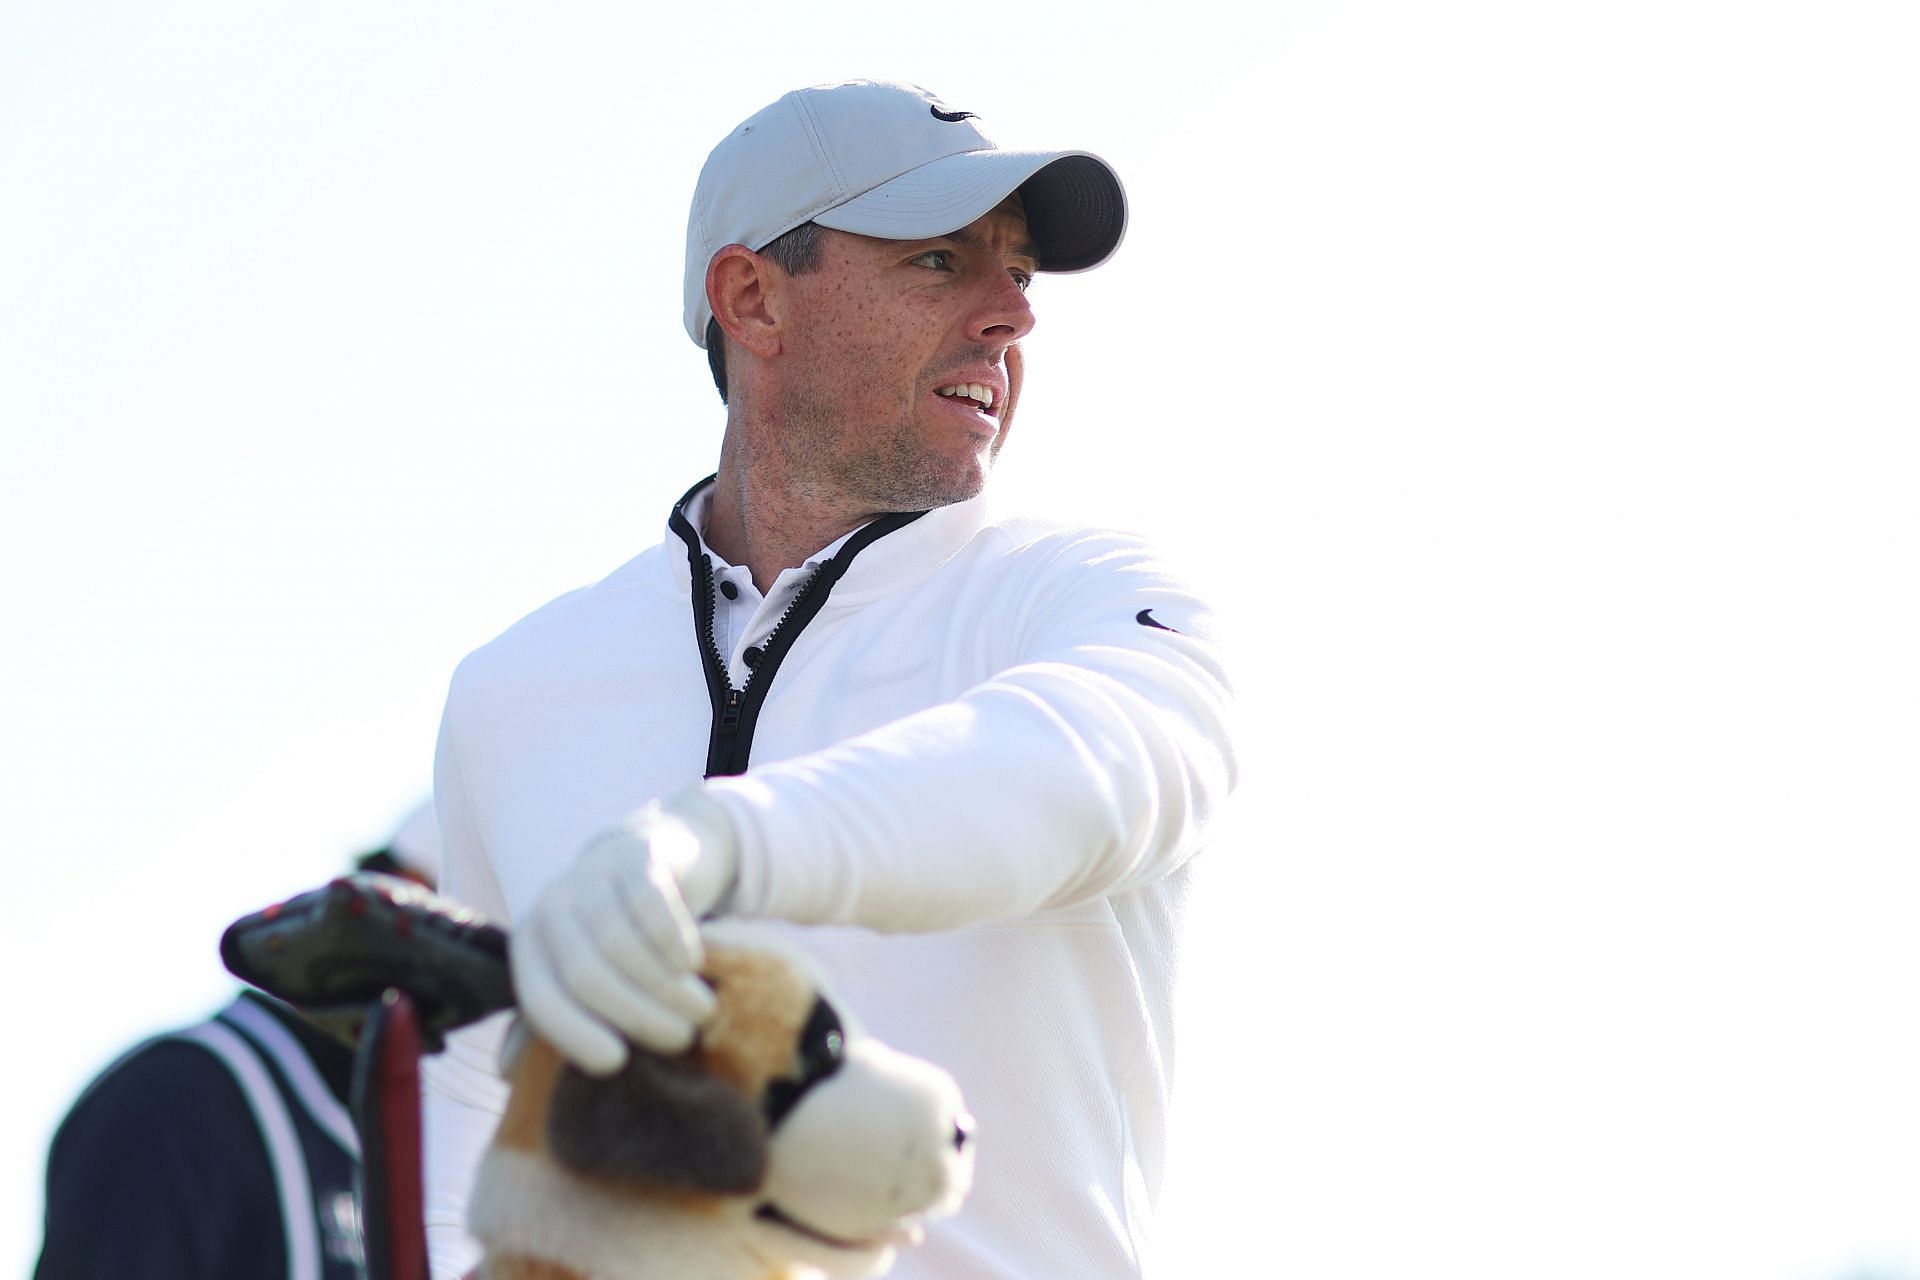 Alfred Dunhill Links Championship - Day One